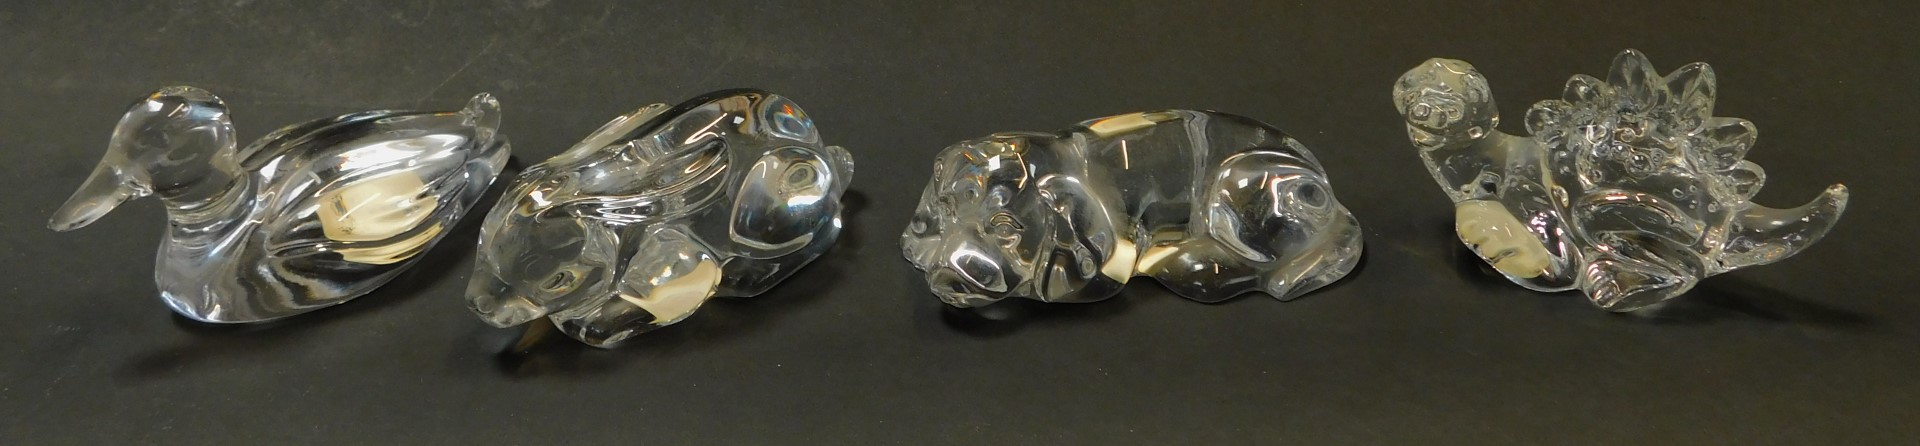 A group of Princess House Crystal Treasures paperweights, modelled as owls, teddy bears, cats, - Image 4 of 6